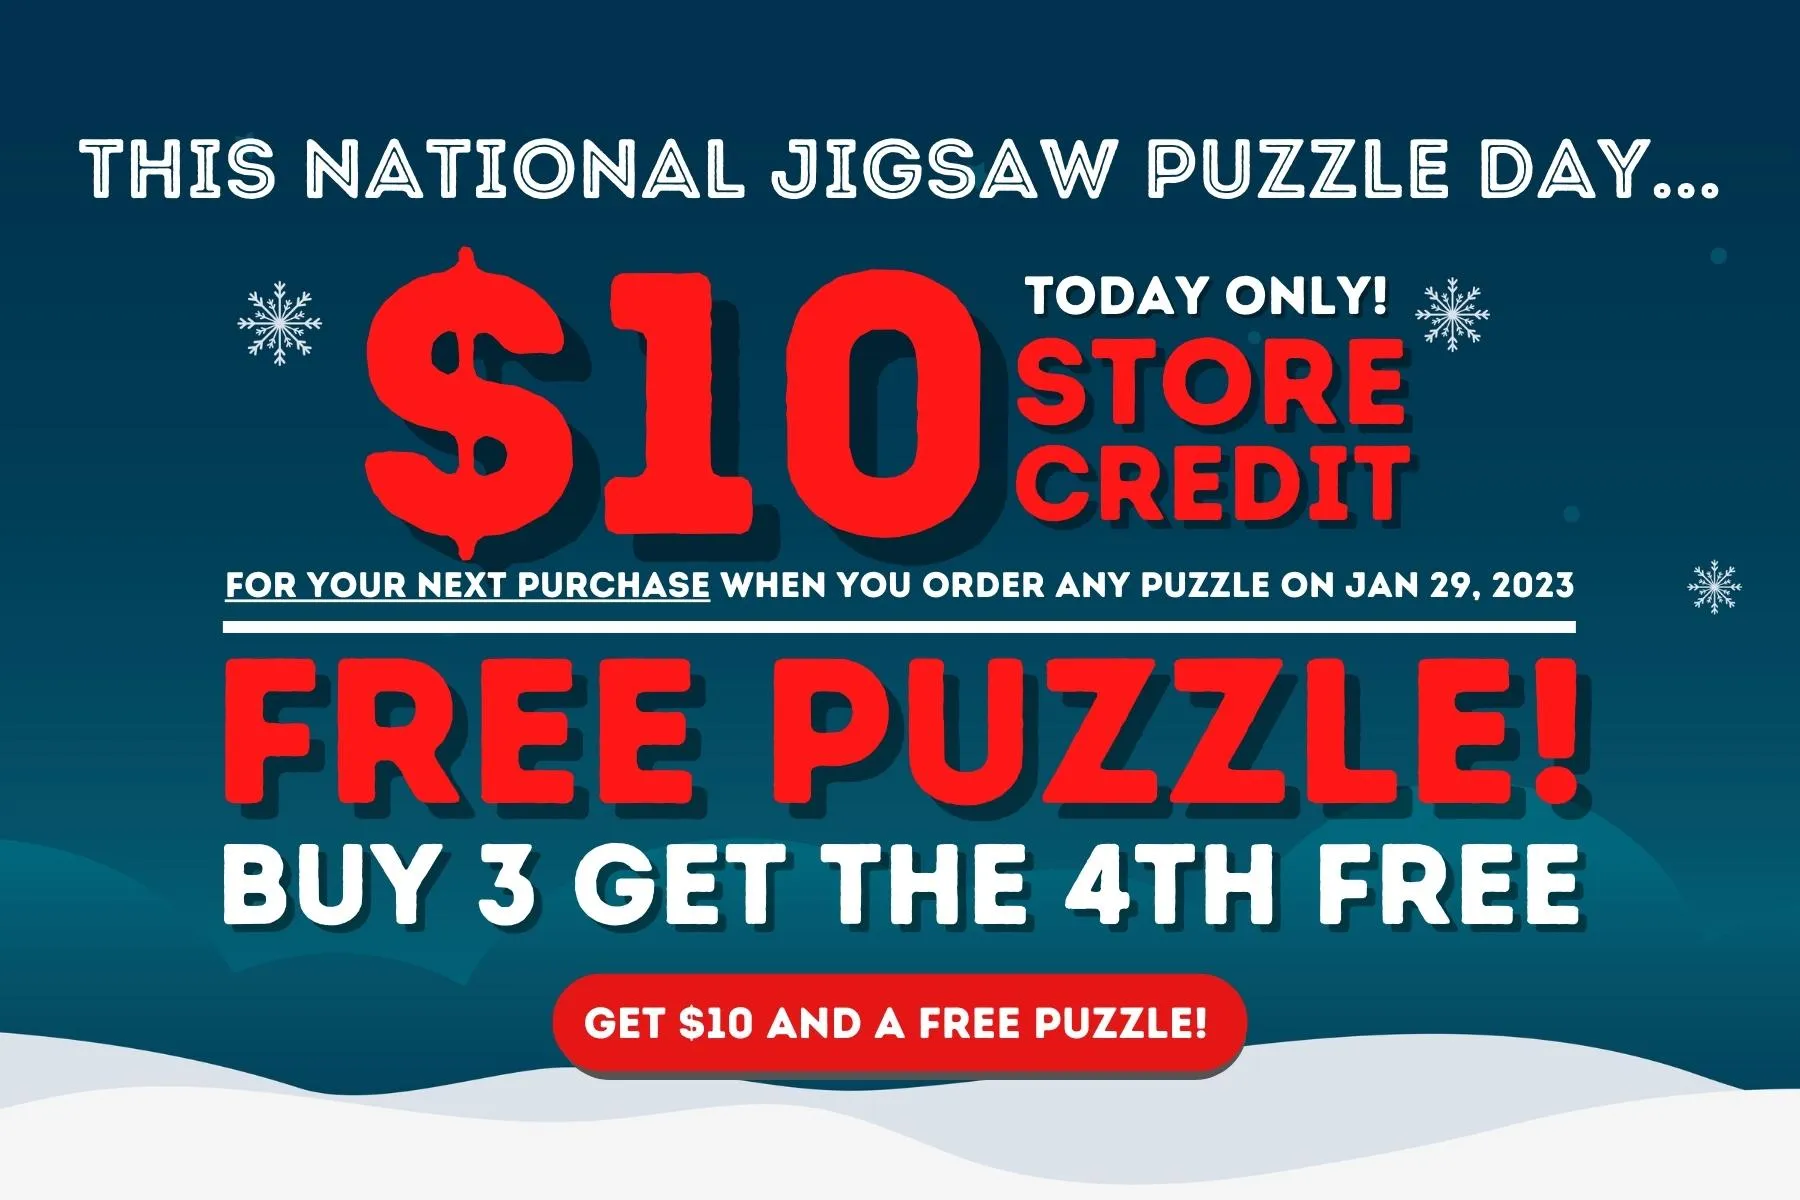 This National Jigsaw Puzzle Day. . . Today Only! $10 Store Credit for Your Next Purchase When You Order Any Puzzle on Jan. 29, 2023. Free Puzzle! Buy 3 Get the 4th Free. Get $10 And a Free Puzzle!